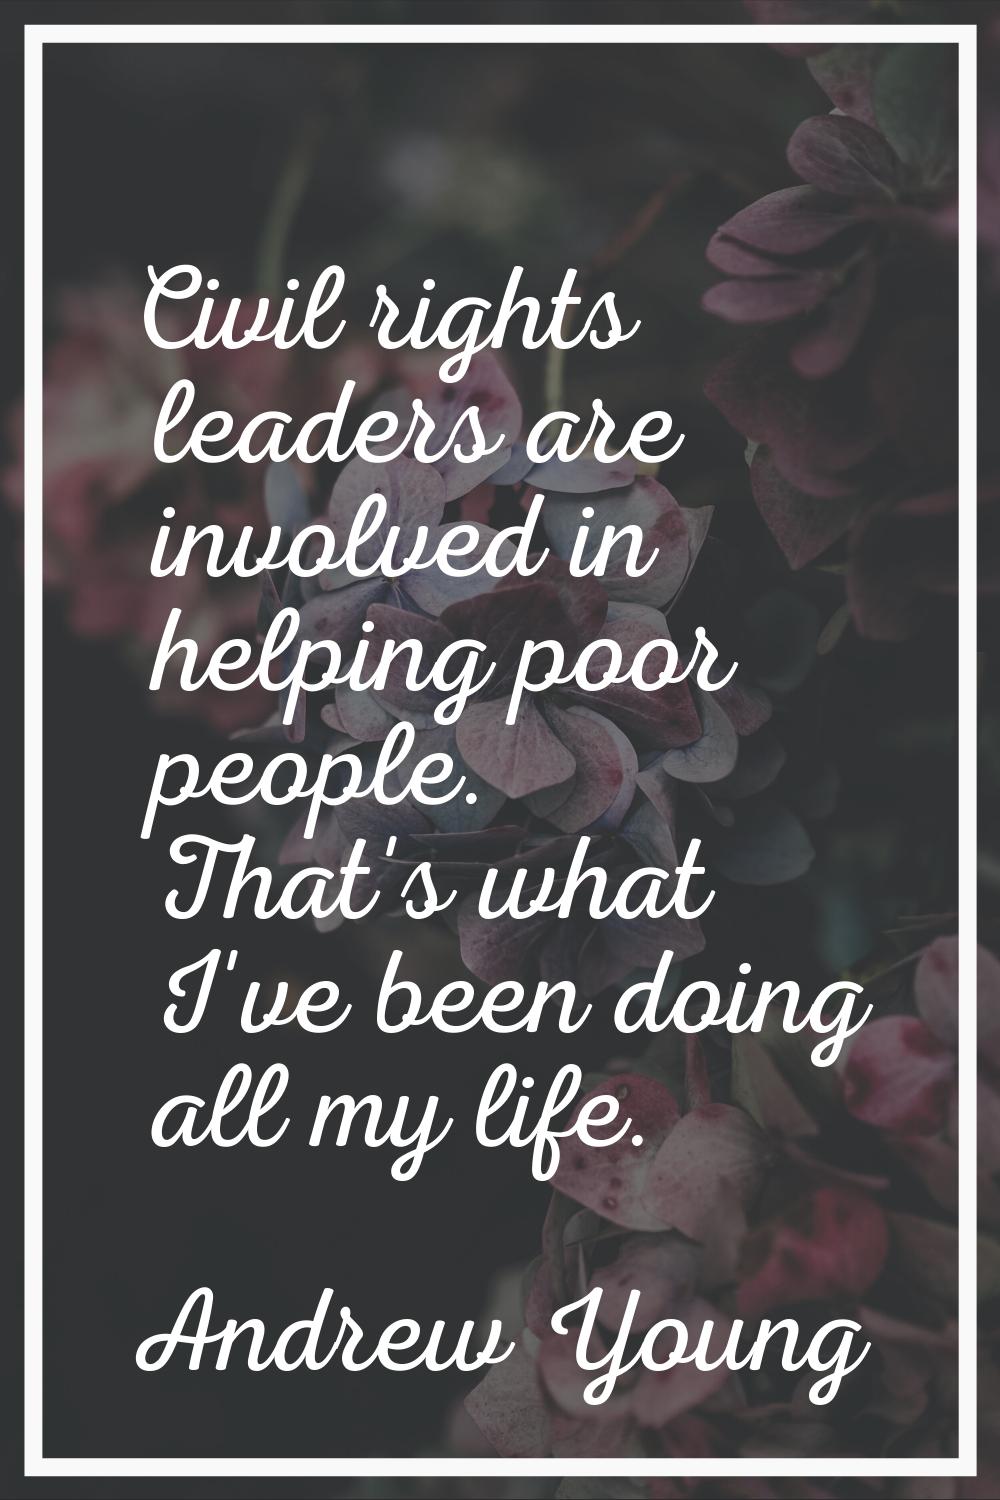 Civil rights leaders are involved in helping poor people. That's what I've been doing all my life.